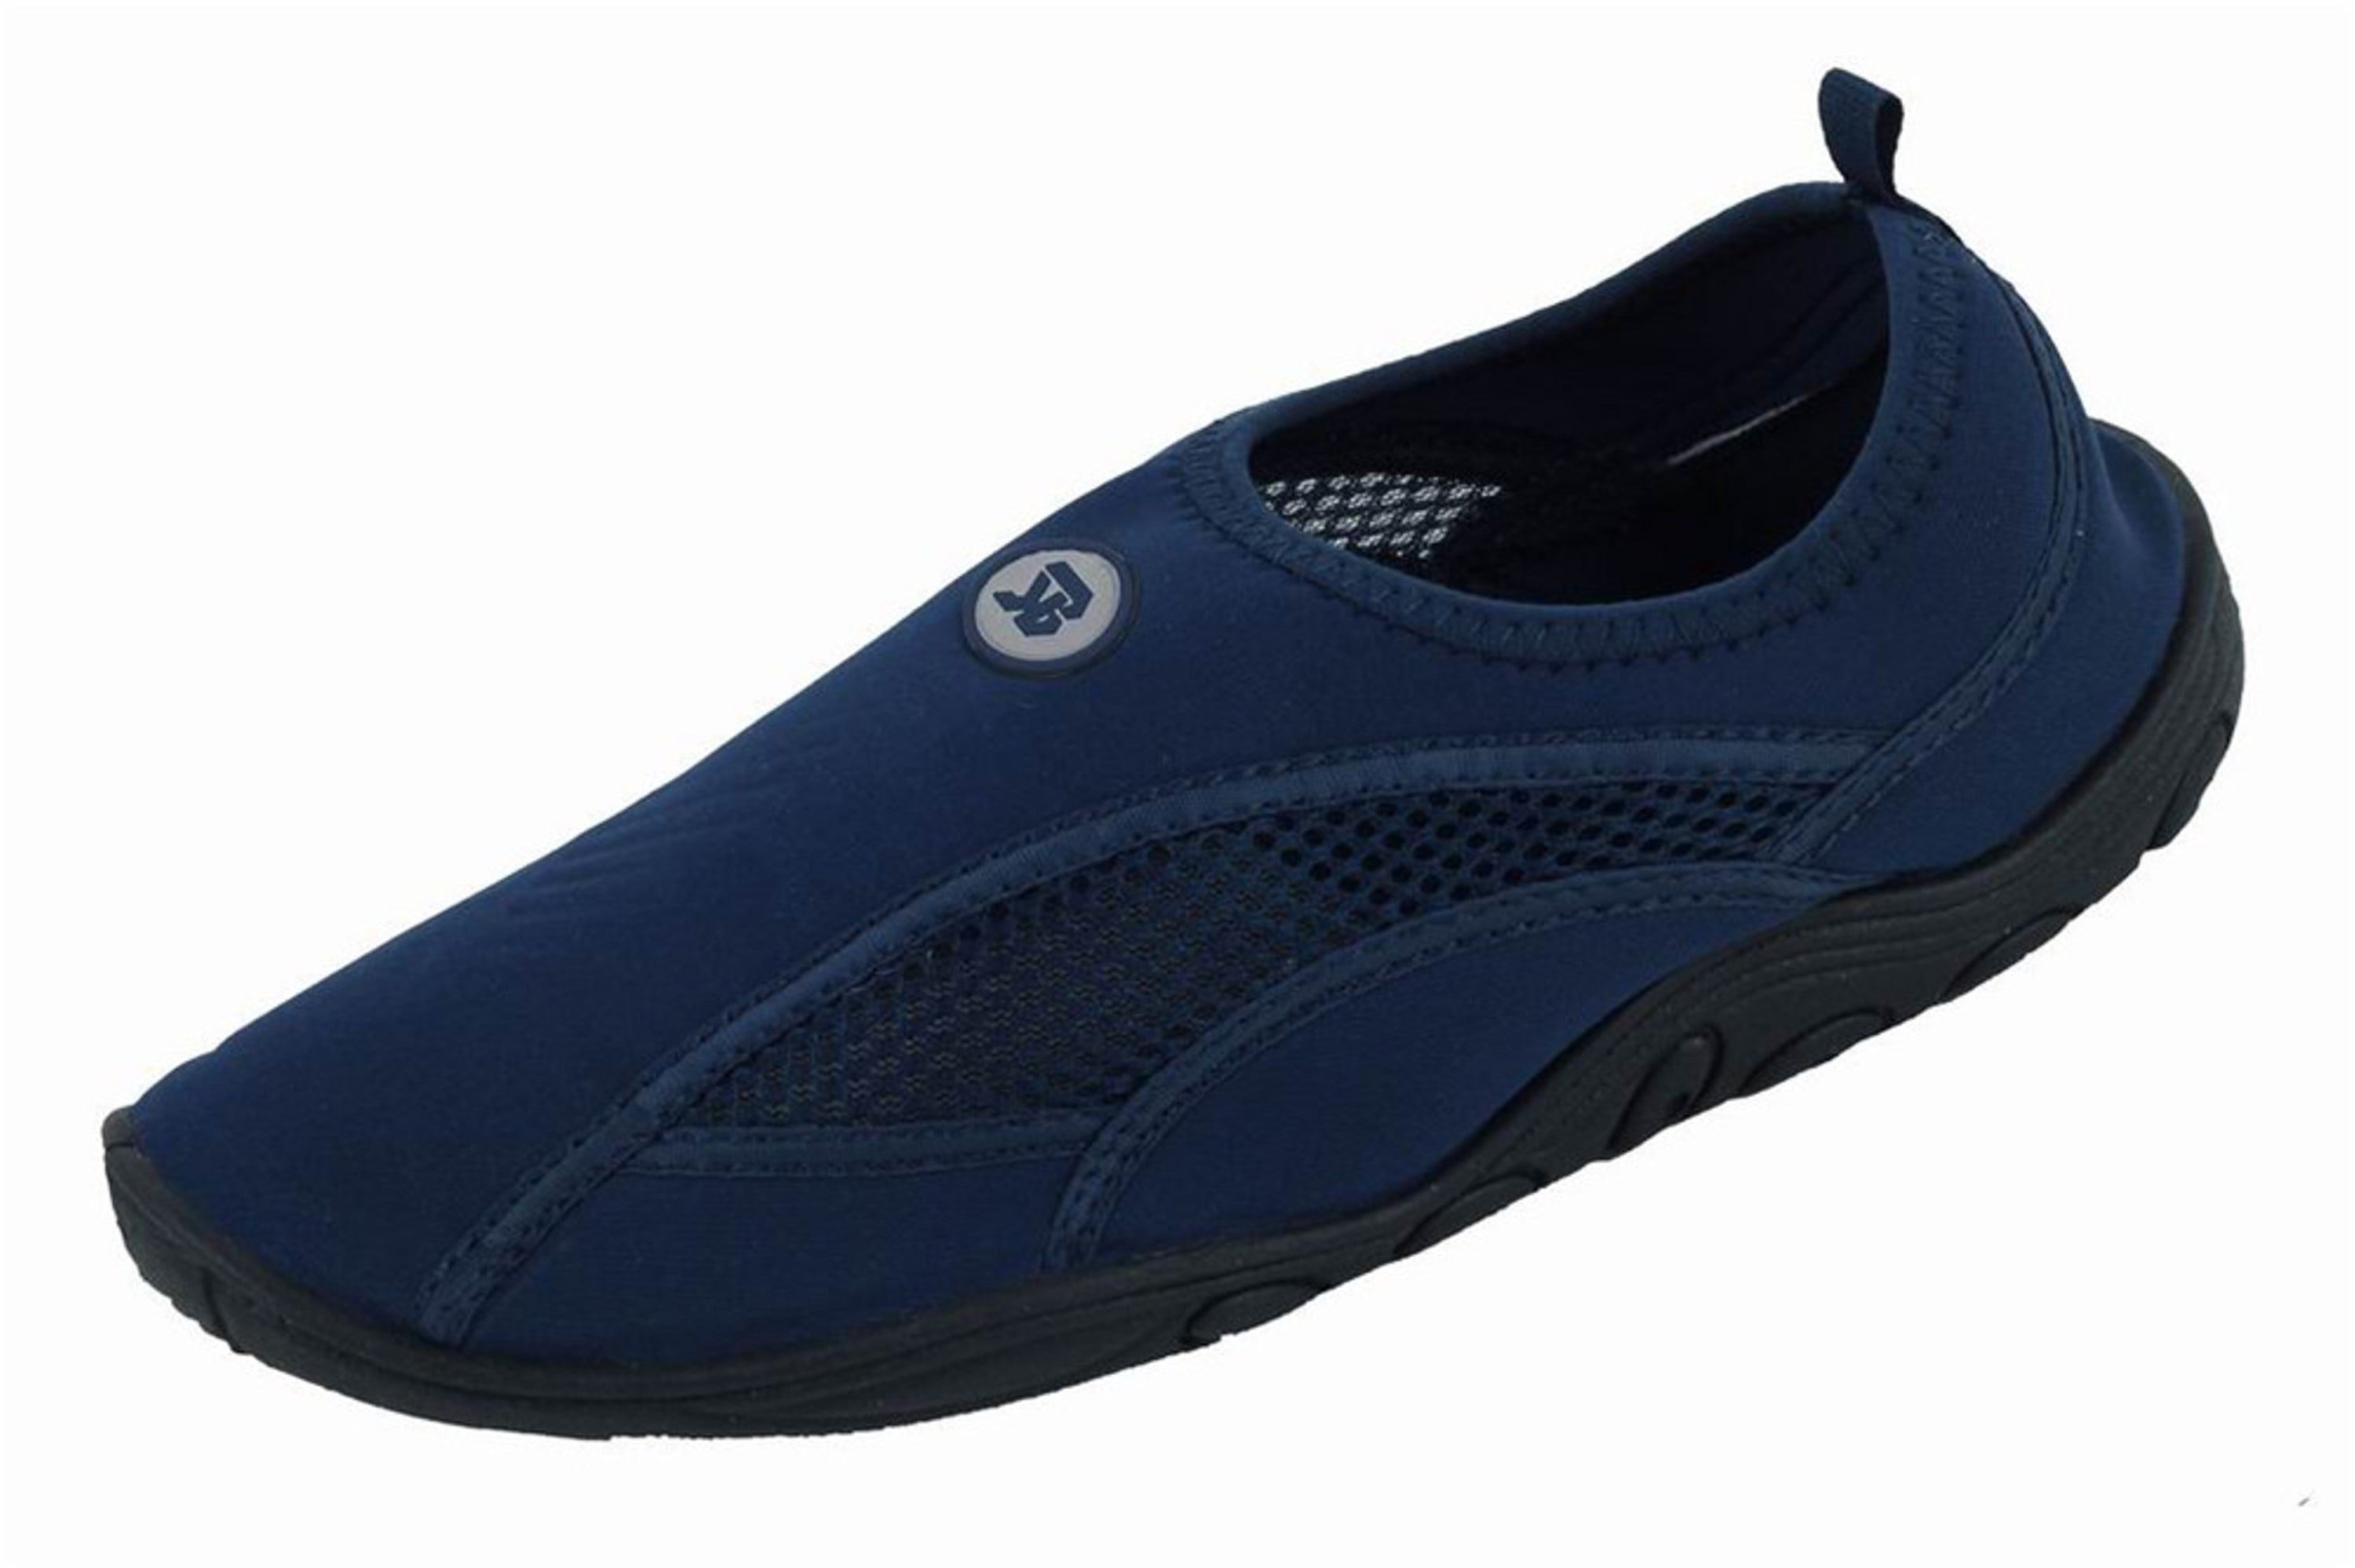 size 12 men's water shoes